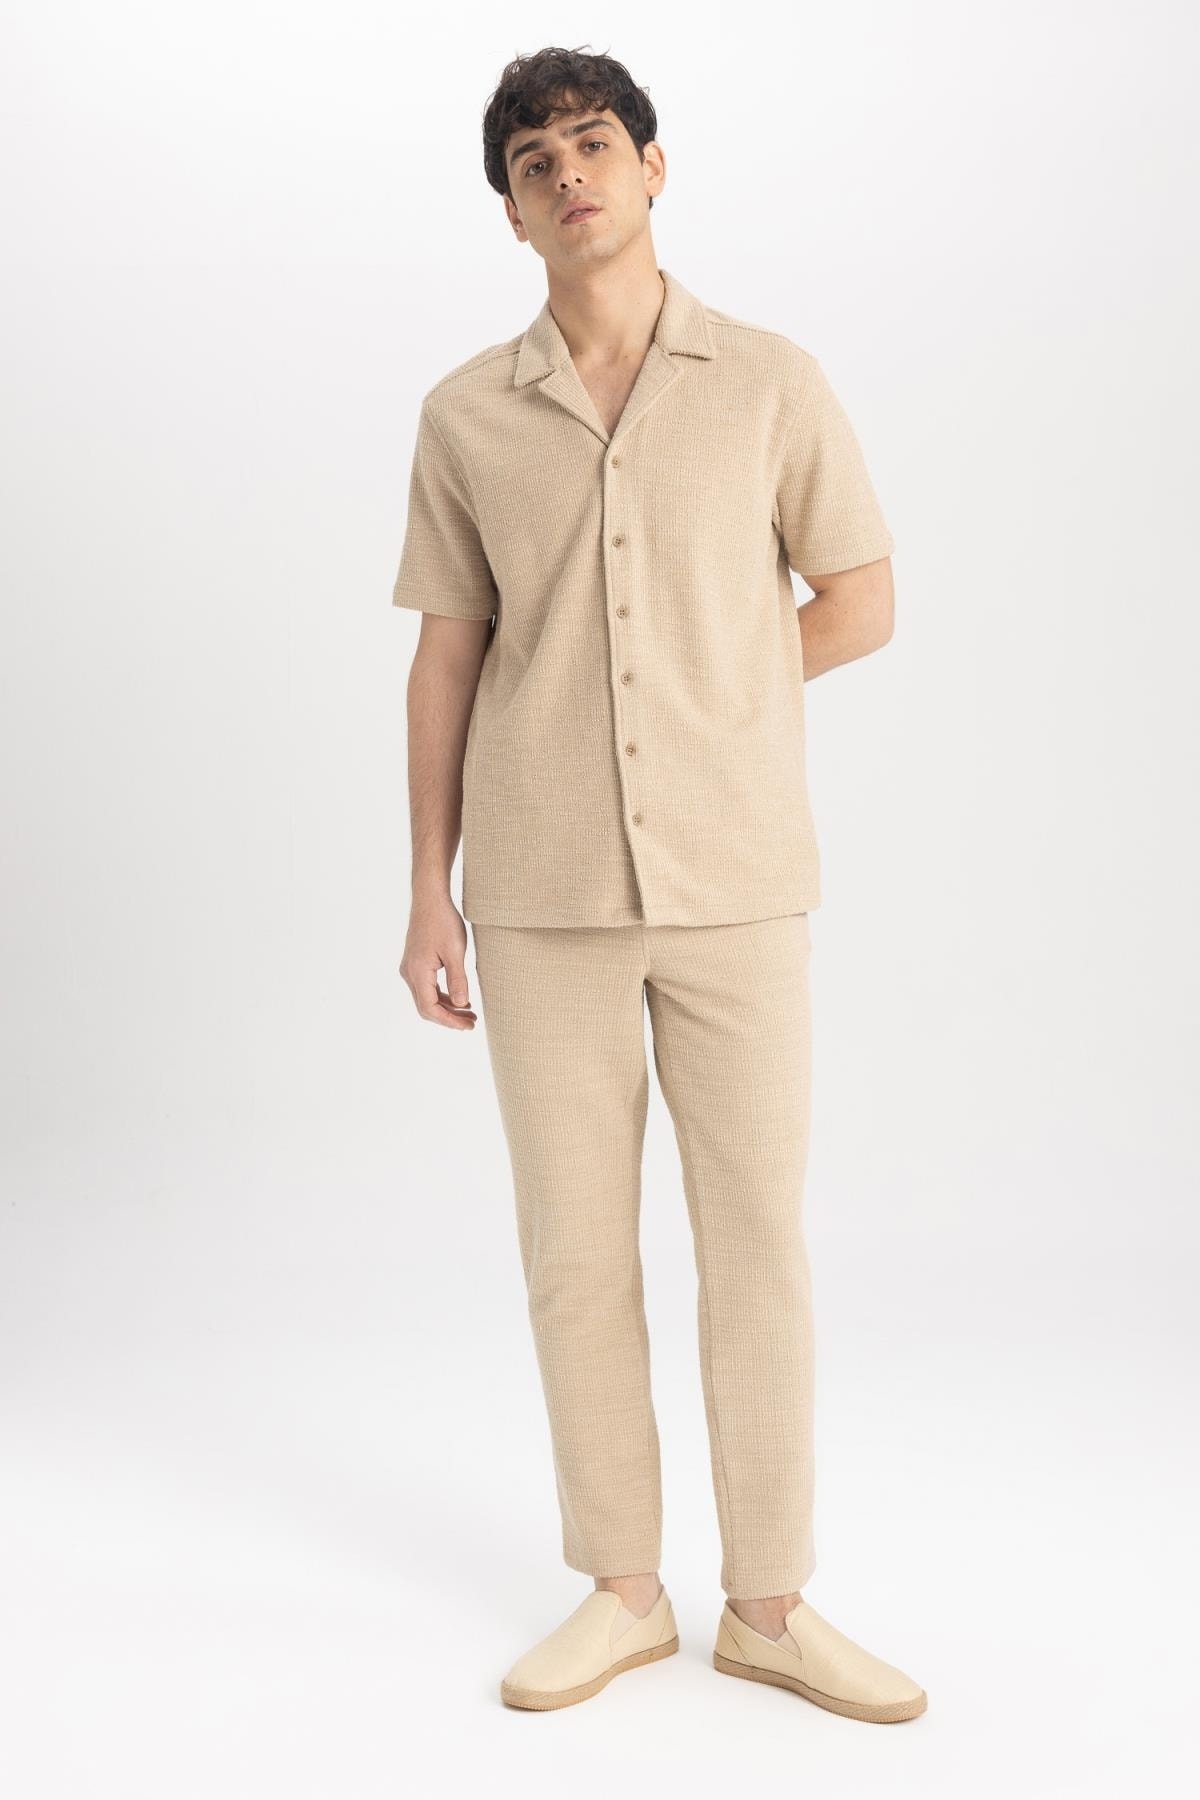 DeFacto Hose Beige Relaxed